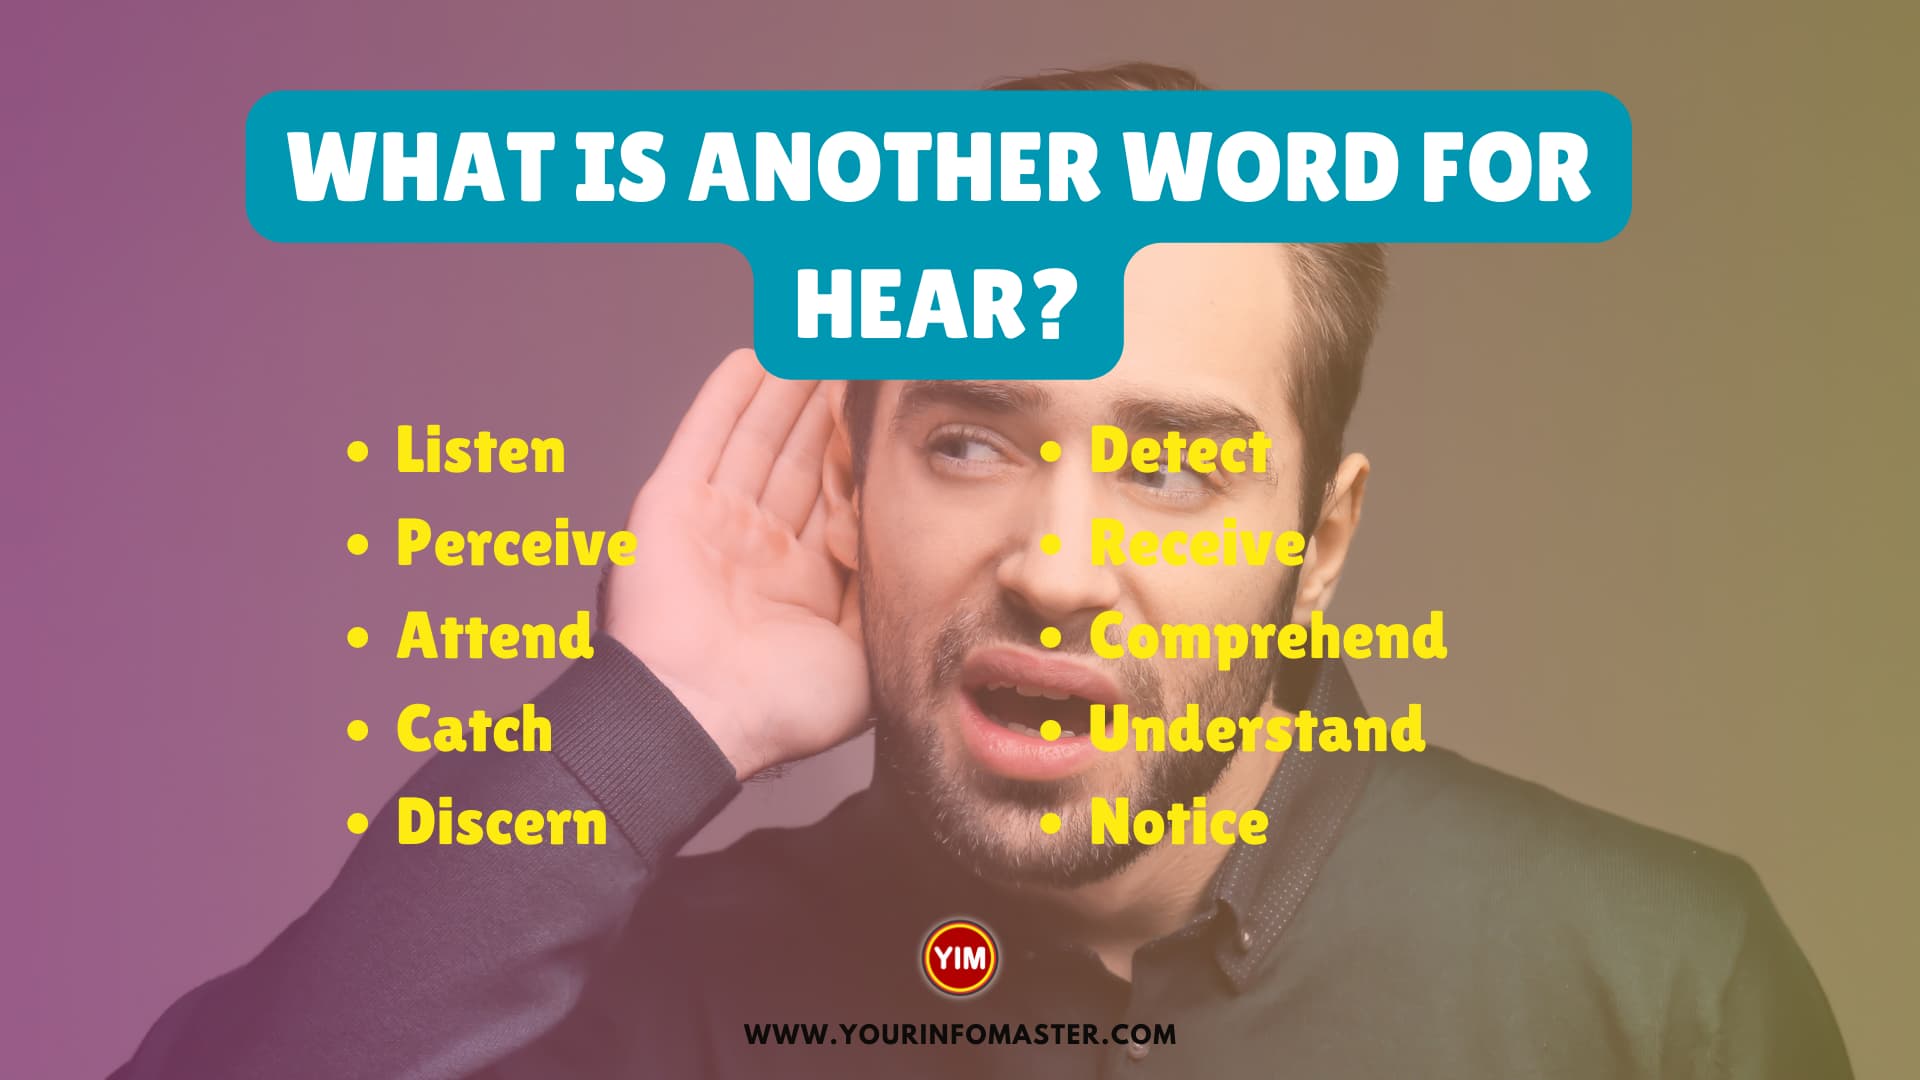 What is another word for Hear